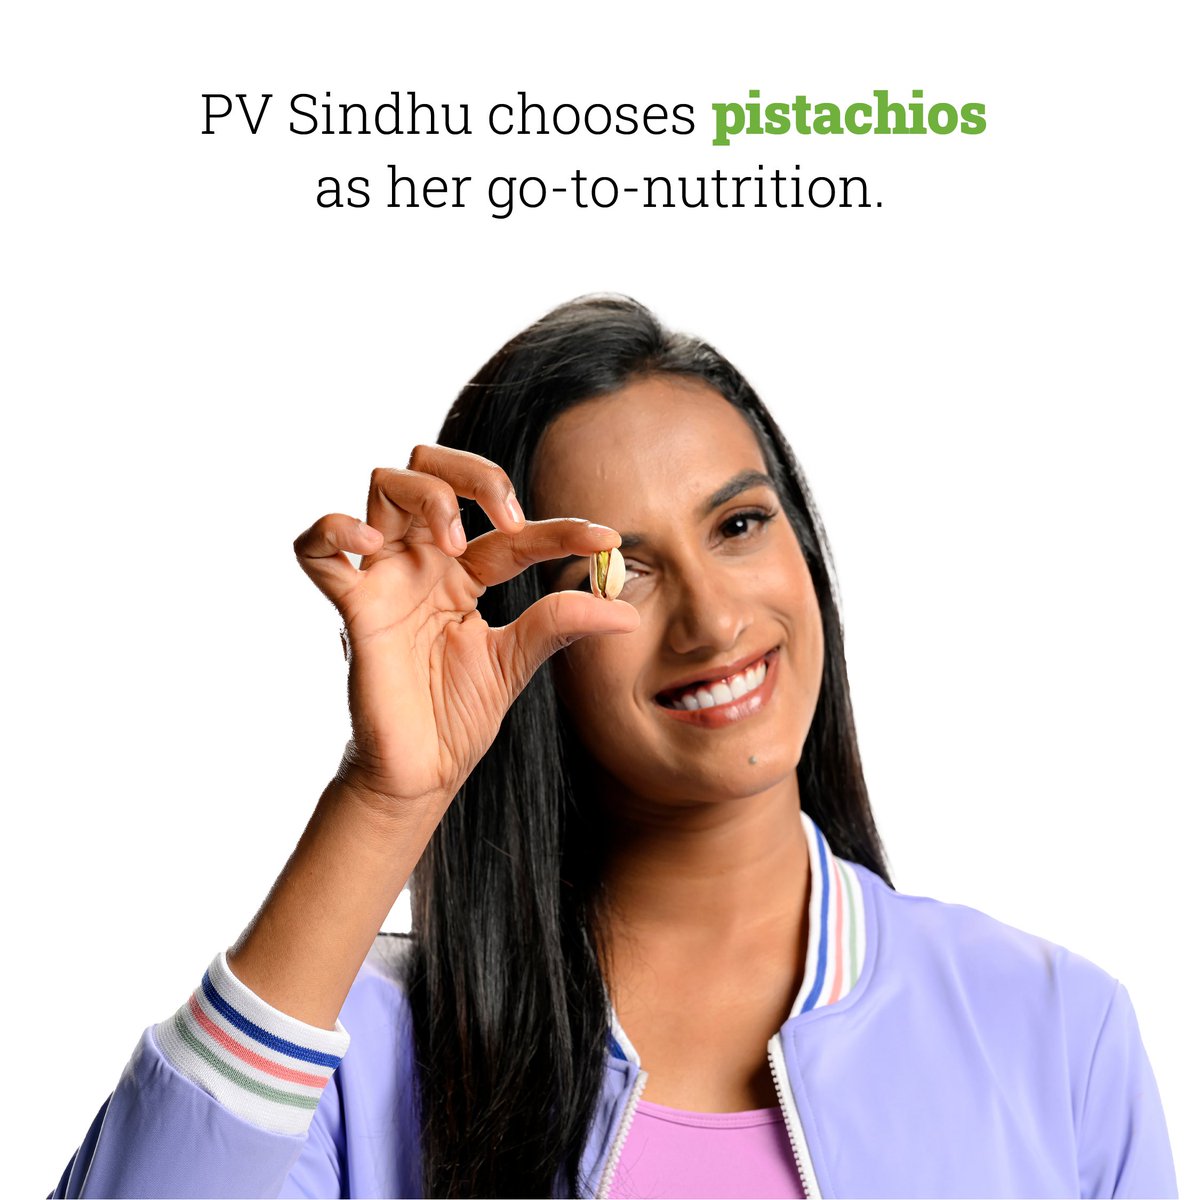 Power up like PV Sindhu with California pistachios- The ultimate nutritious snack!

#Californiapistachios #Pistachios #AmericanPistachiosIndia #AmericanPistachios #protein #completeprotein